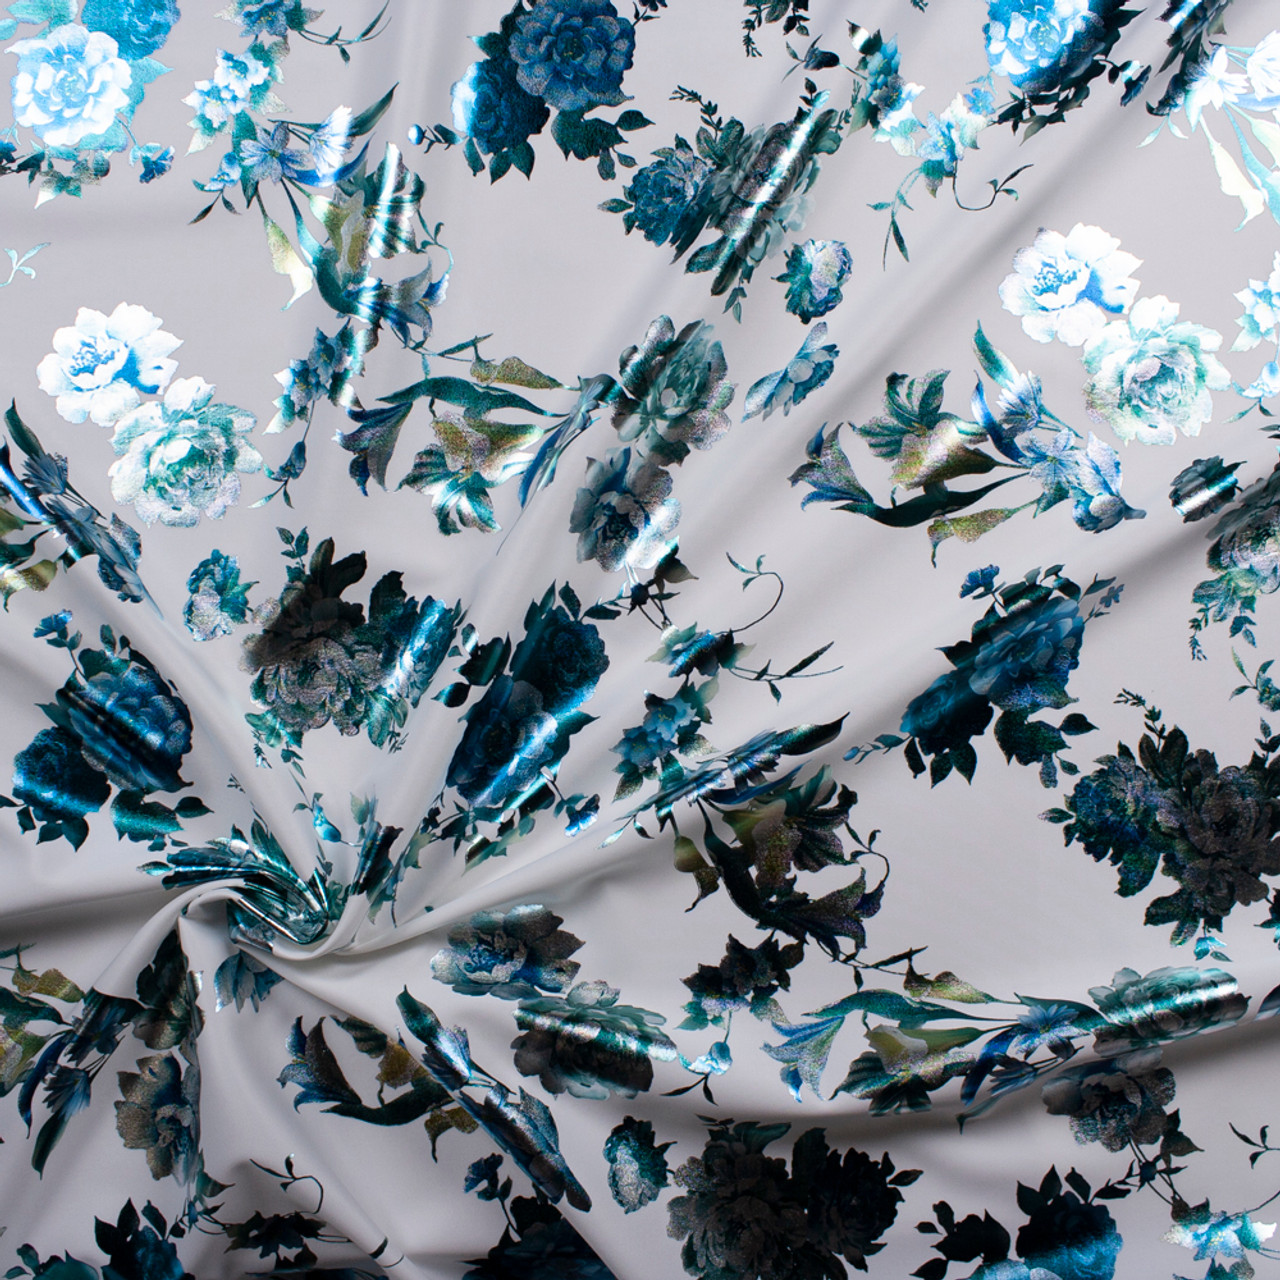 Cali Fabrics Metallic Teal Floral on White Scuba Knit Fabric by the Yard